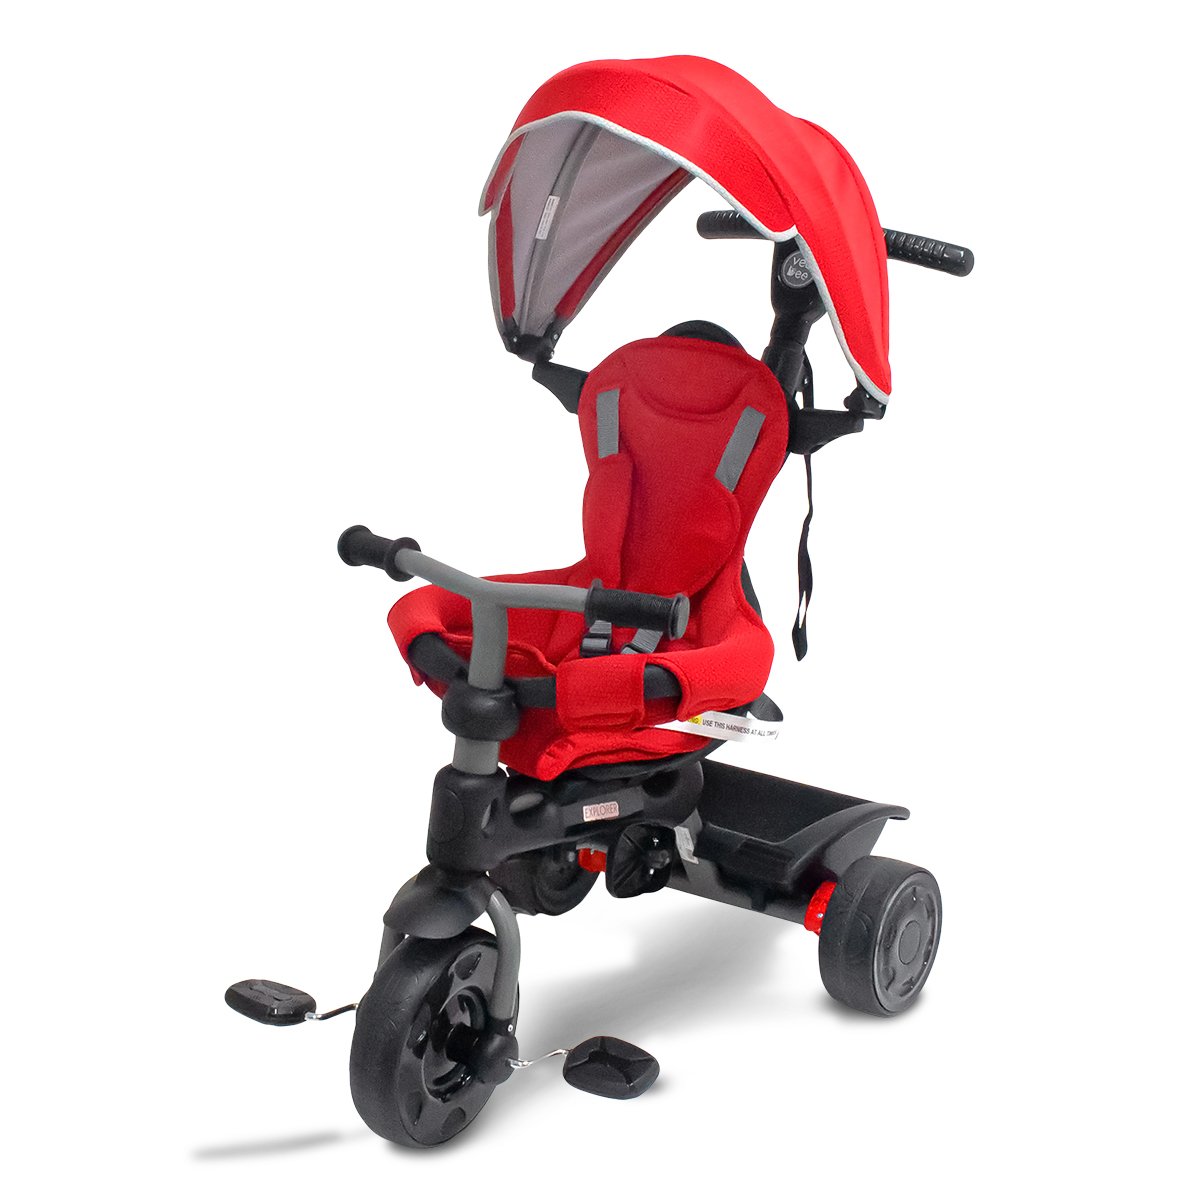 Veebee Explorer 3-Stage Kids Trike with Canopy - Red 1